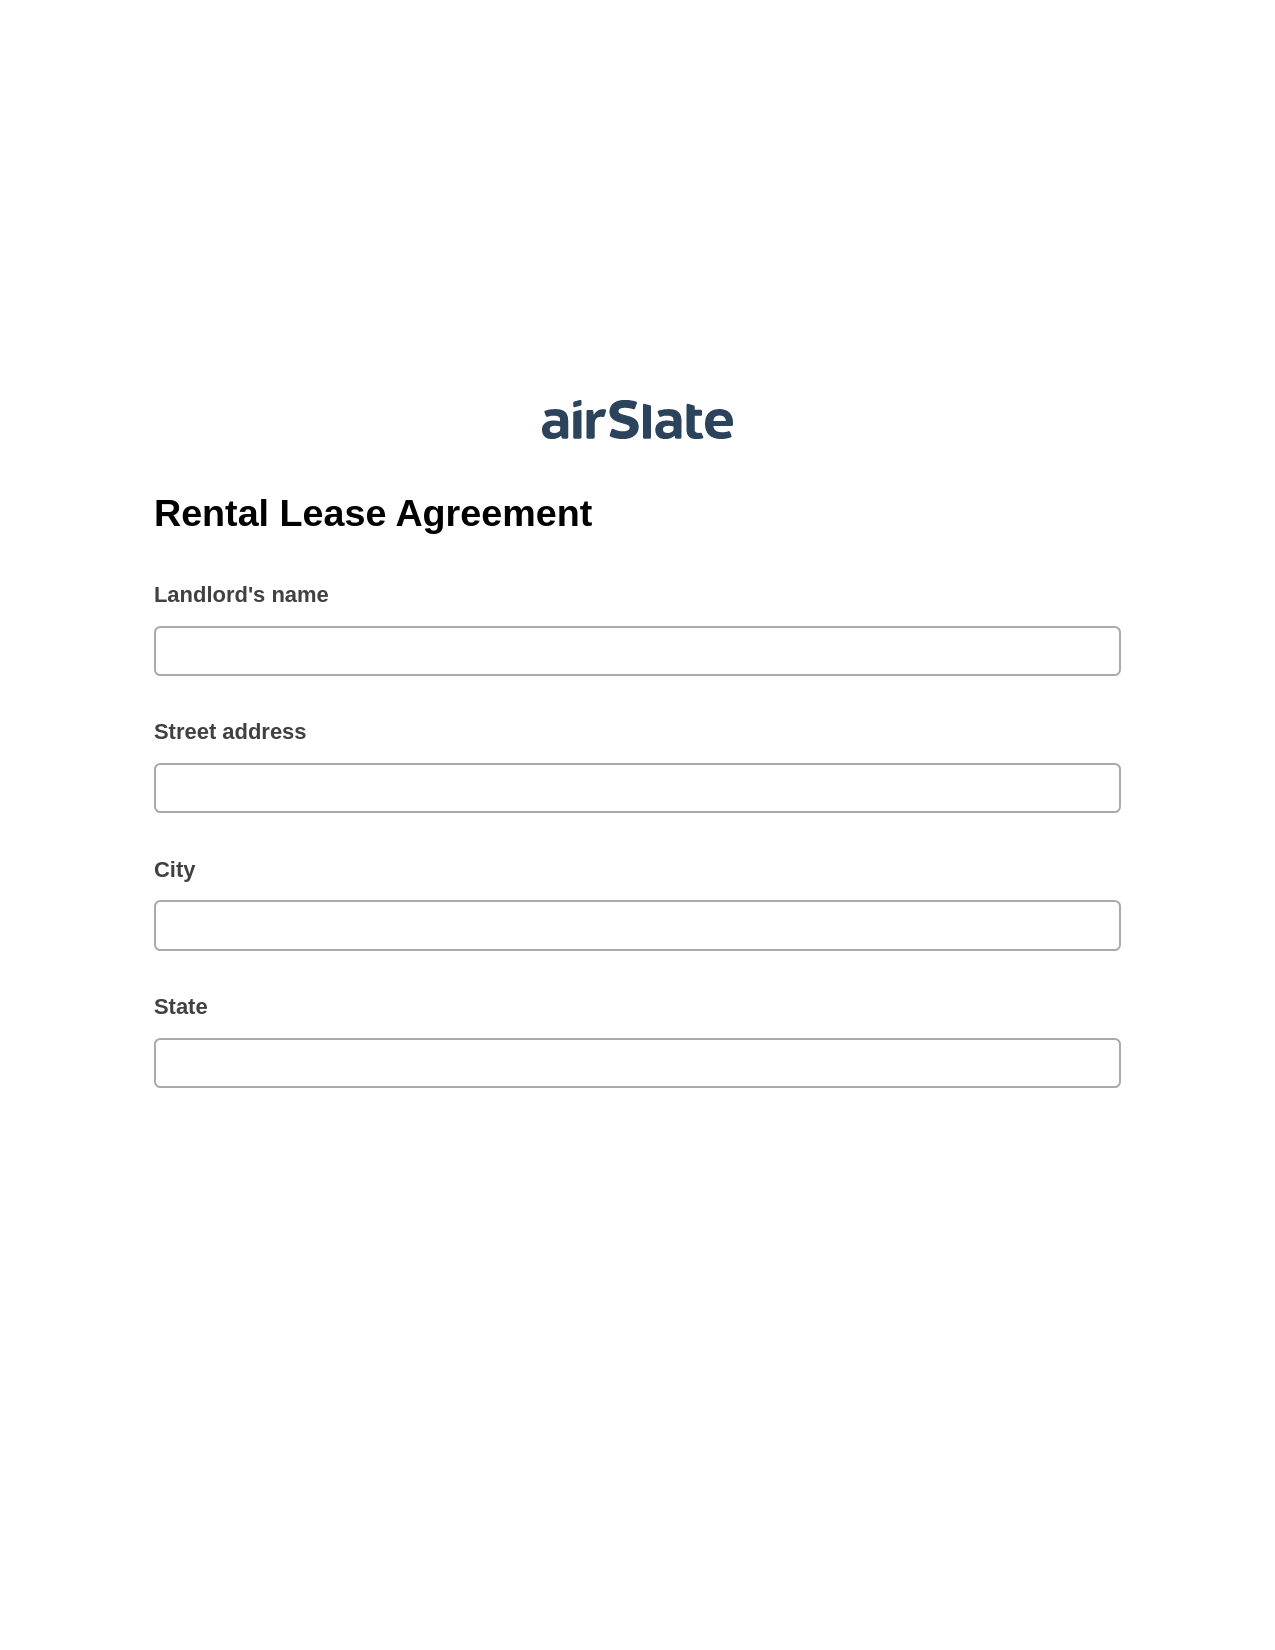 Rental Lease Agreement Pre-fill Dropdown from Airtable, Create Slate every Google Sheet Update Bot, Export to NetSuite Record Bot